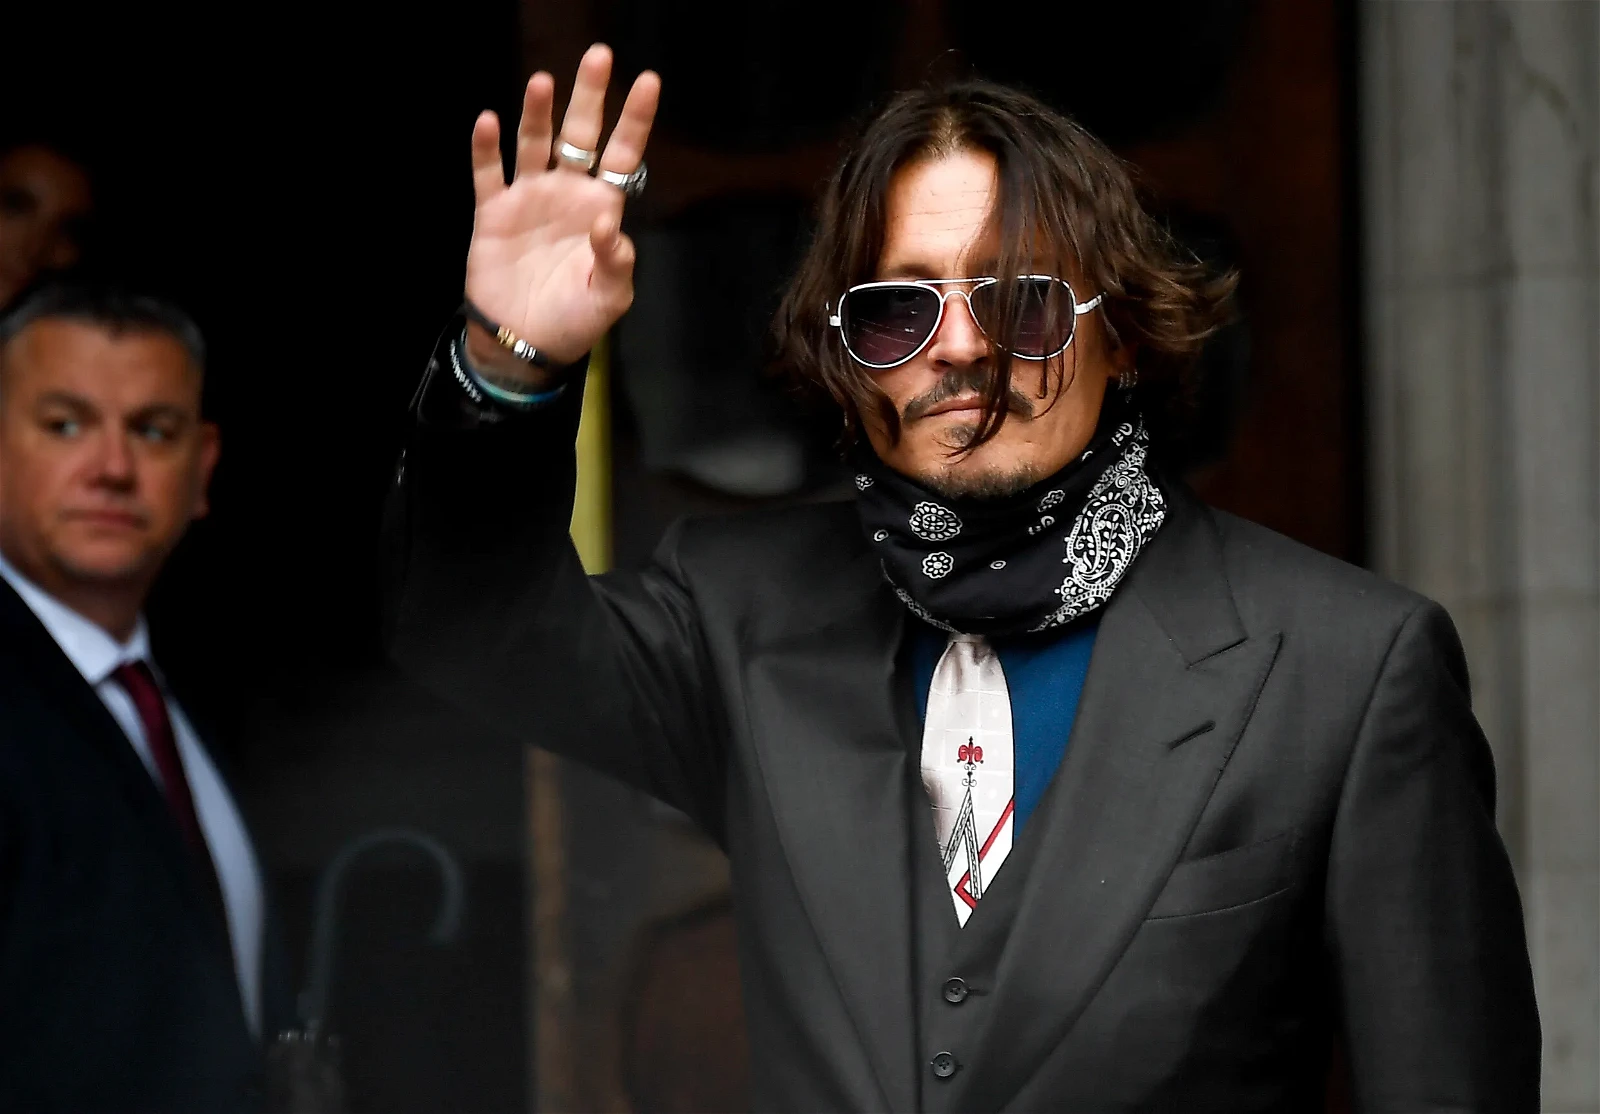 Will Pirates of the Caribbean go on without Johnny Depp?